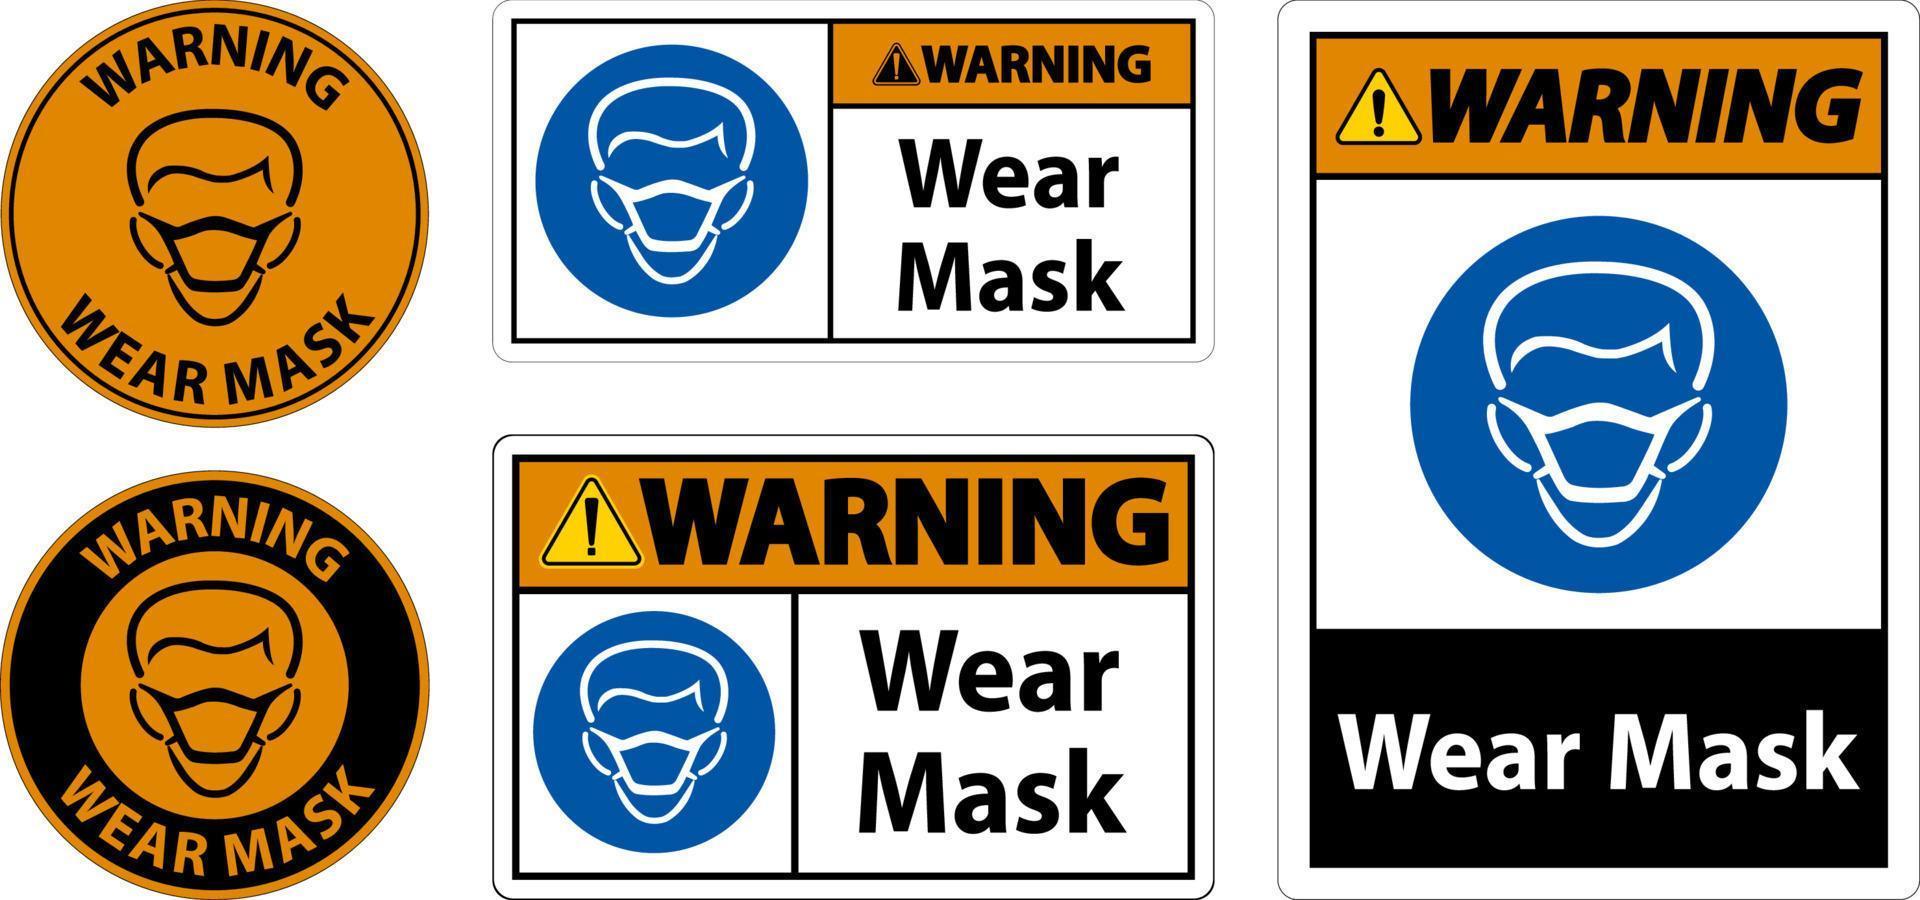 Warning Wear Mask Sign On White Background vector